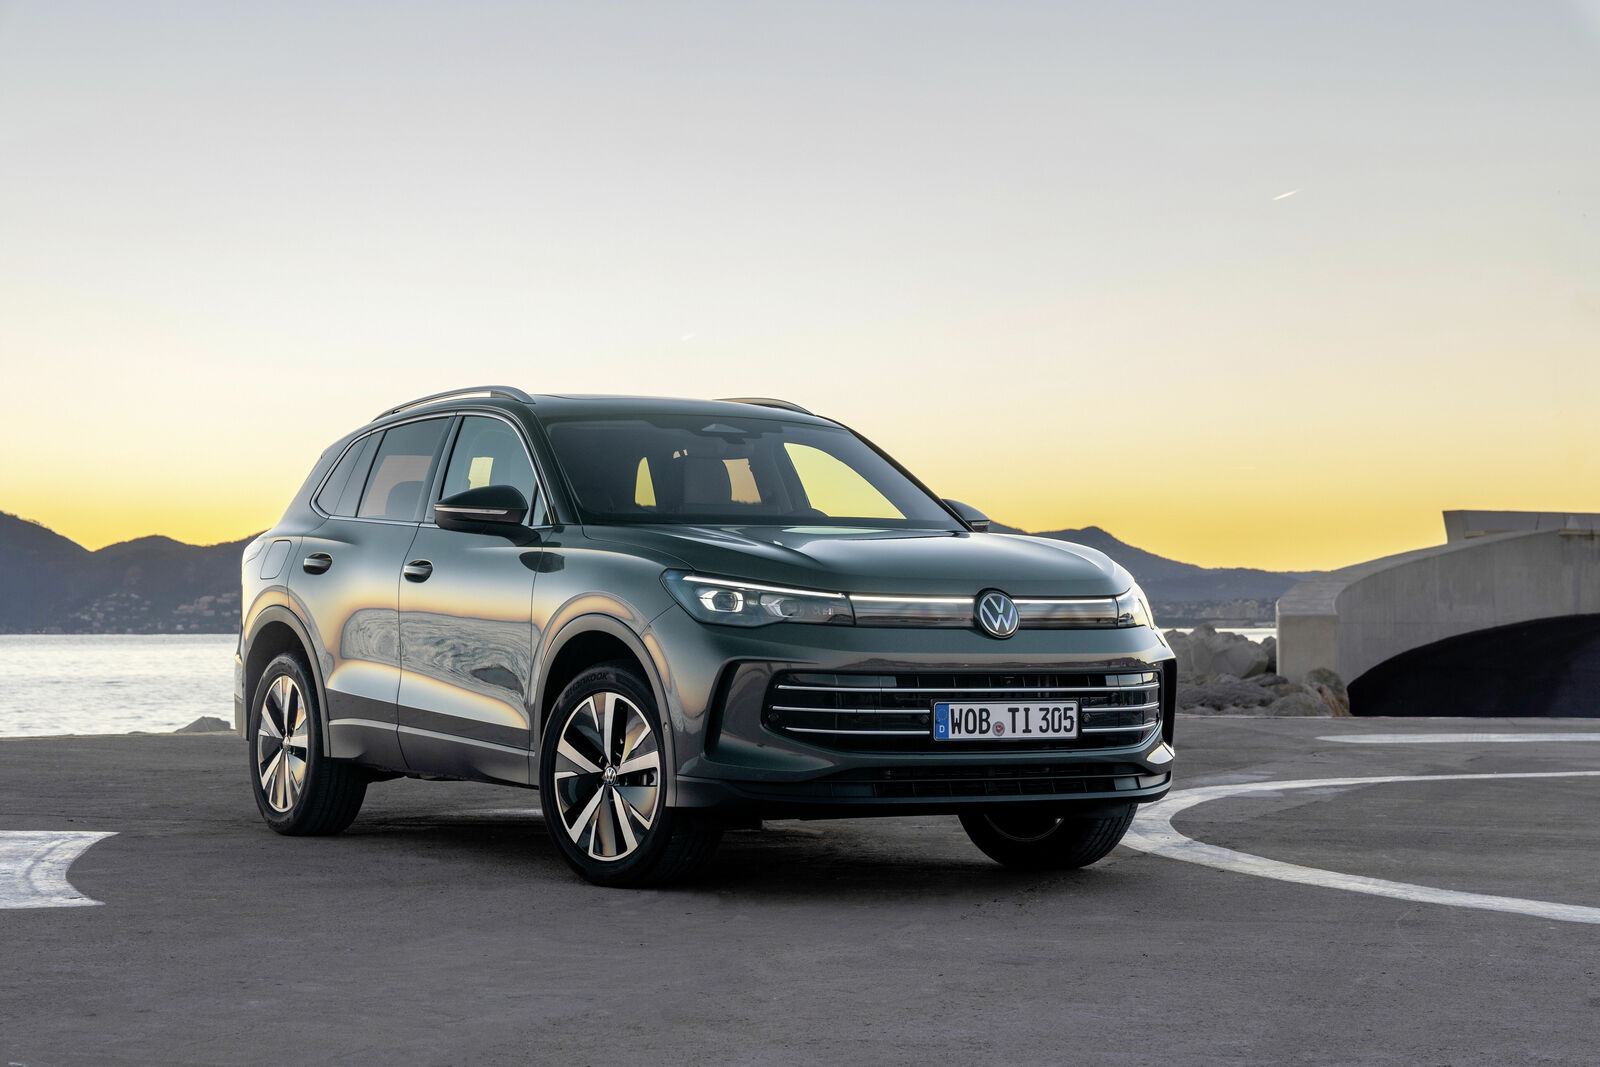 The all-new Tiguan is now available to order in Europe